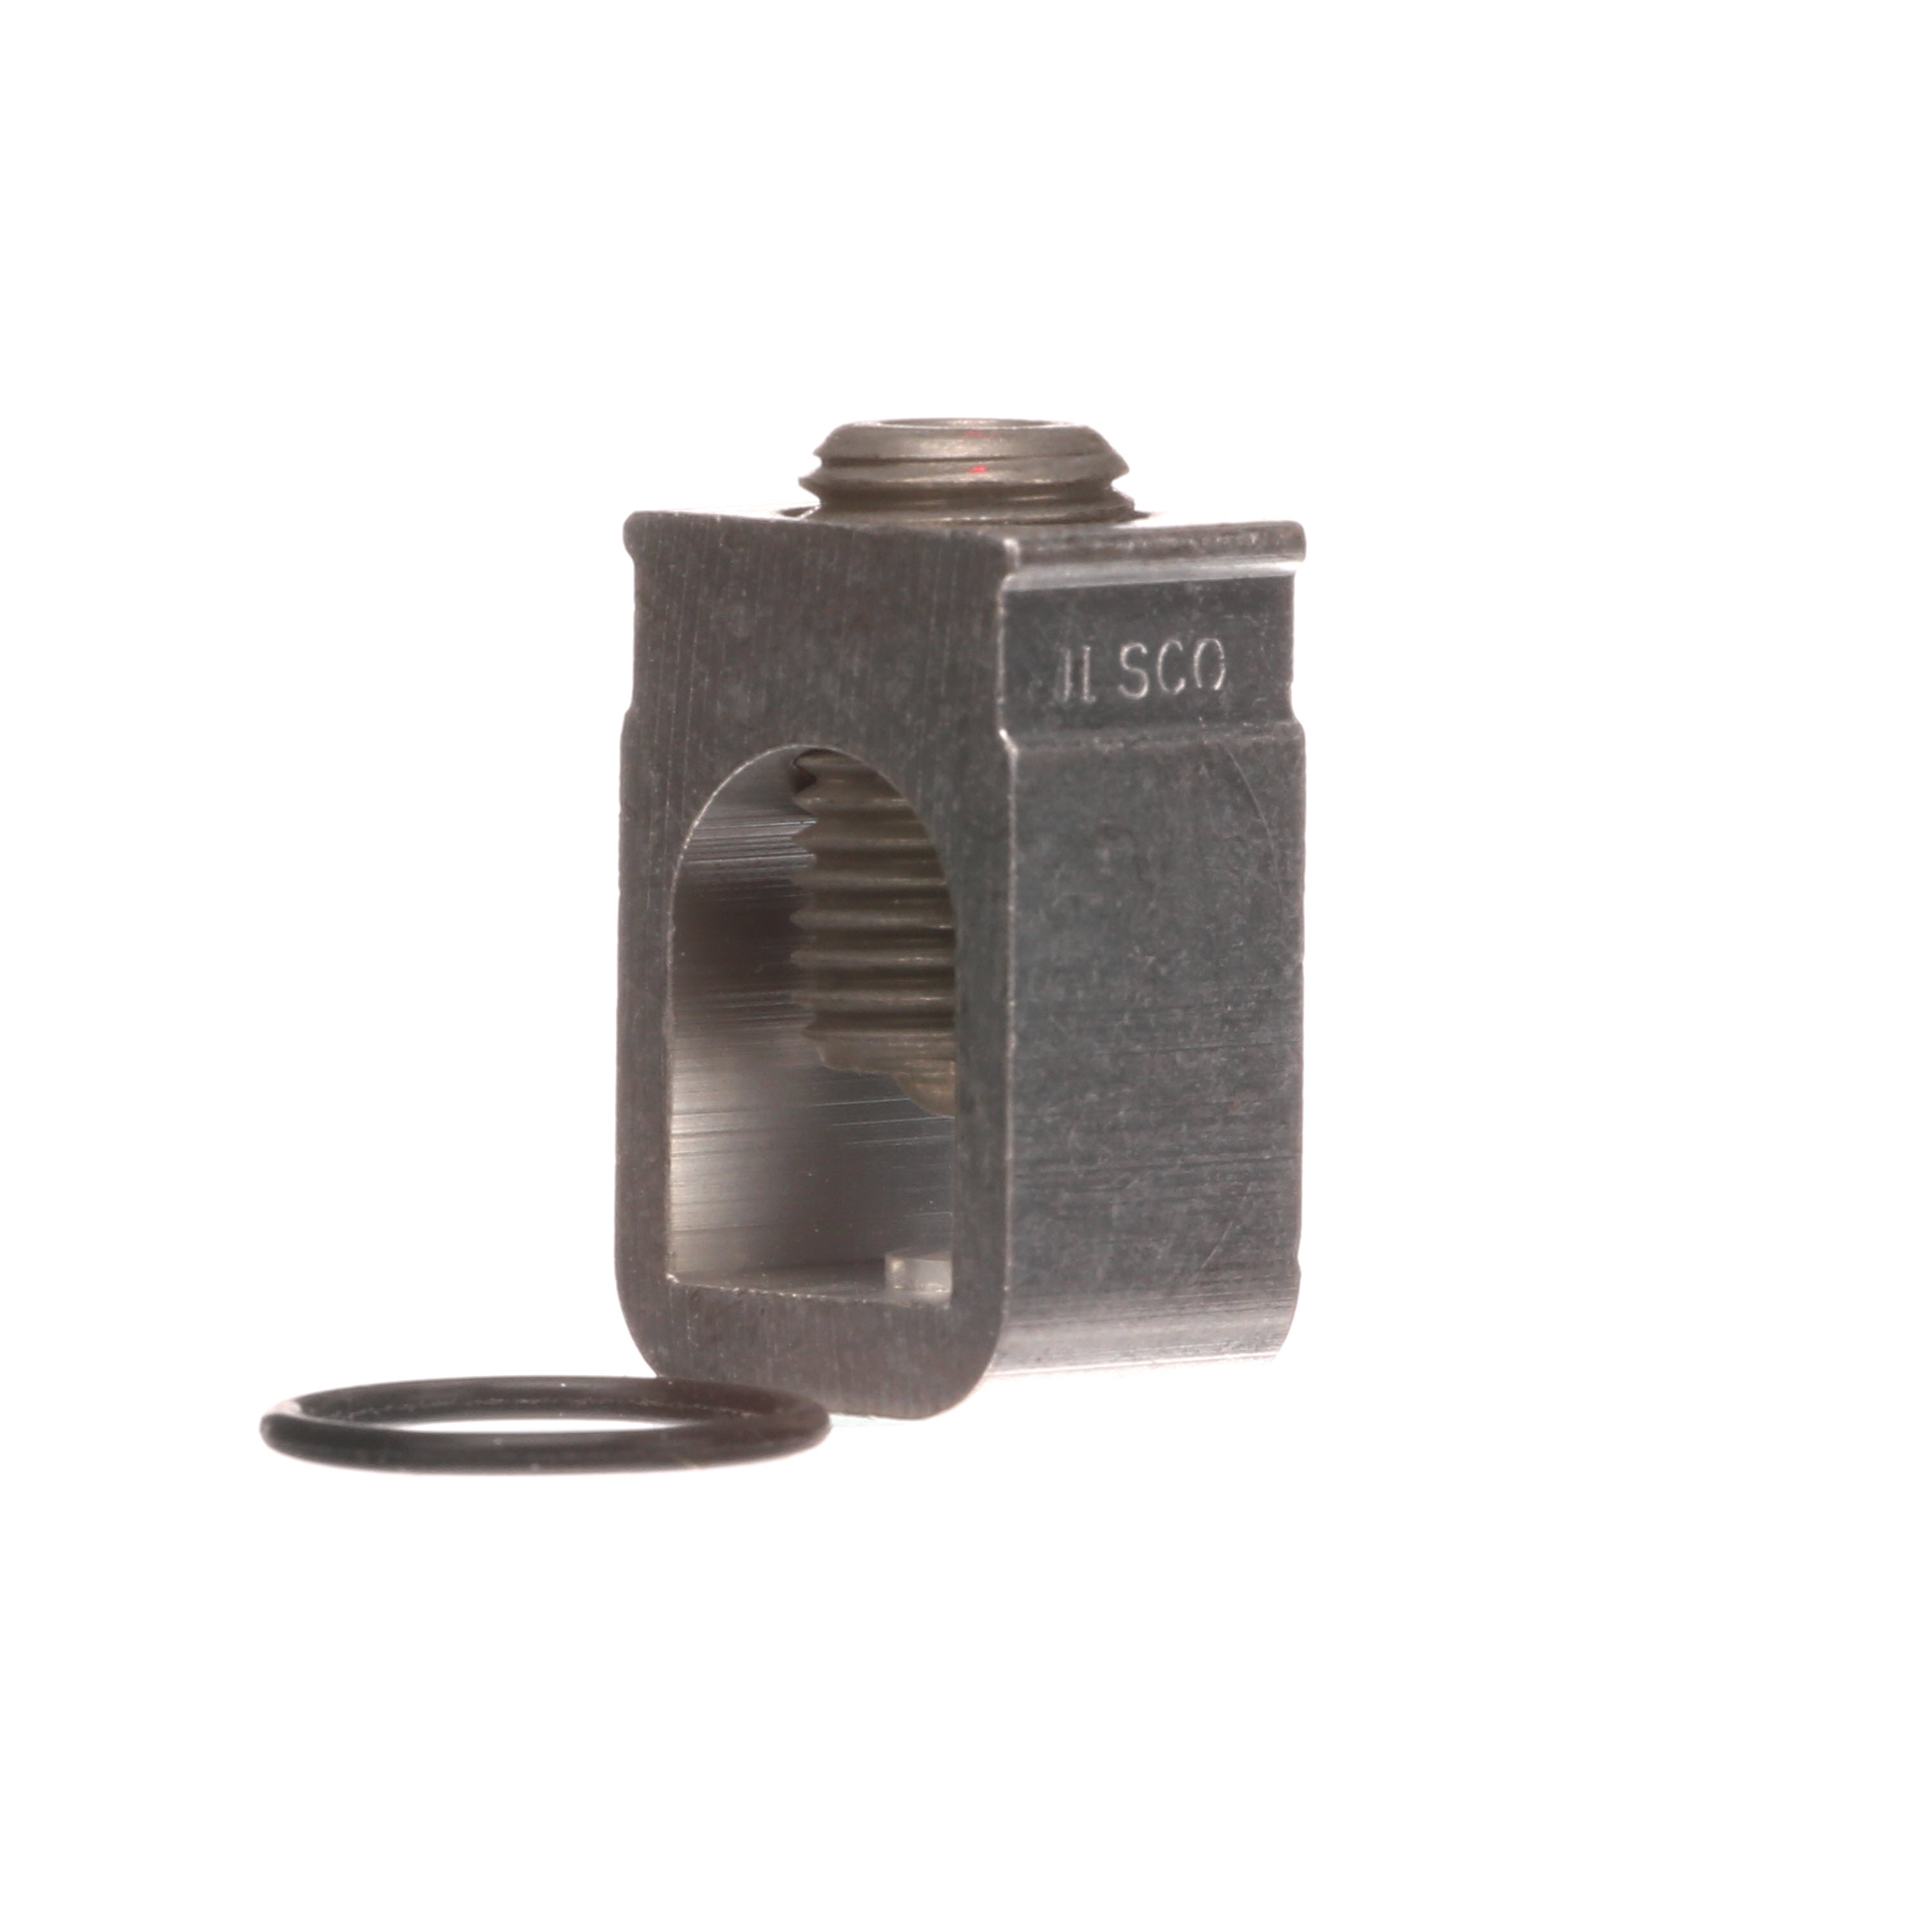 SIEMENS LOW VOLTAGE SENTRON MOLDED CASE CIRCUIT BREAKER ACCESSORY. ALUMINUM BODY LUG FOR 2/3-POLE 110A - 125A ED FRAME BREAKER. WIRE RANGE 3 - 3/0 AWG (CU) / 1- 2/0 (AL). SUITABLE FOR LINE AND LOAD SIDES. SINGLE LUG.